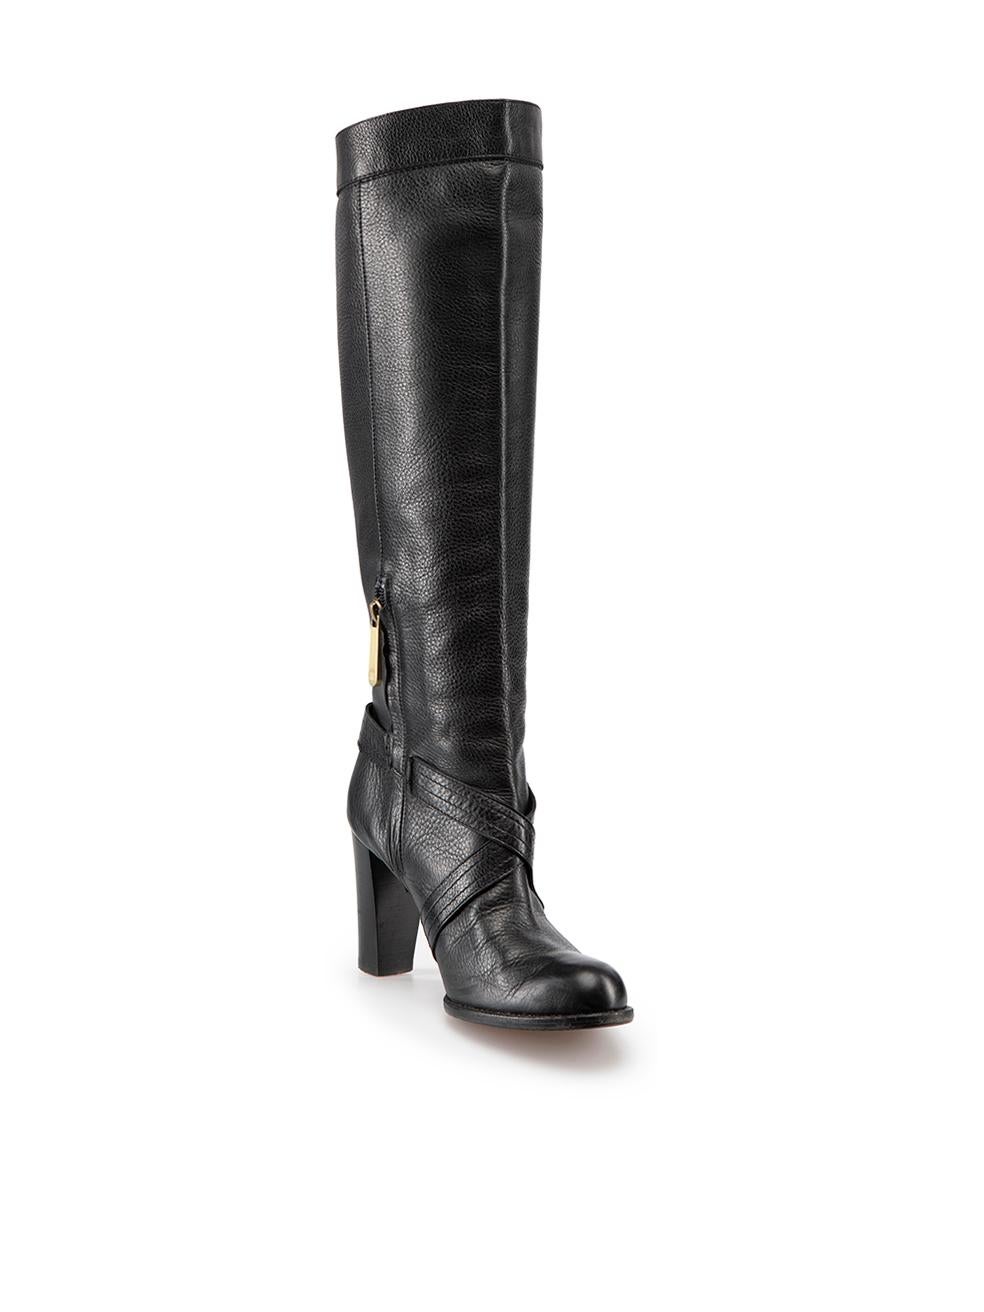 CONDITION is Very good. Minimal wear to boots is evident. Minimal wear to both boot toes and heels with abrasions to the leather on this used Bally designer resale item.
 
 Details
 Black
 Leather
 Boots
 Knee high
 Almond toe
 High heeled
 Side zip